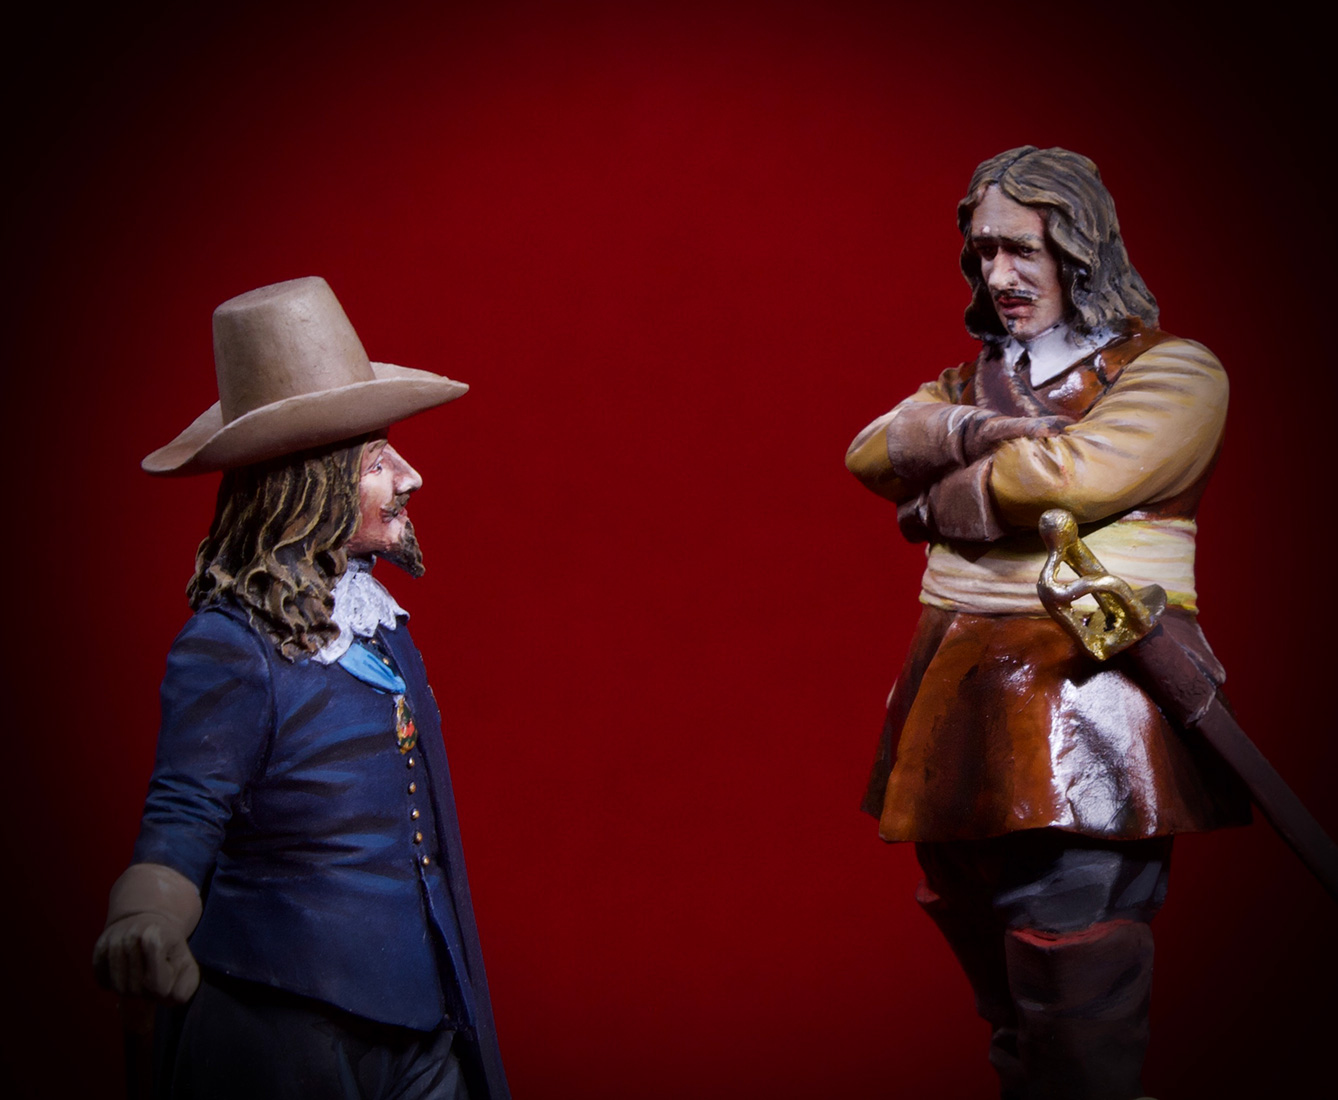 Figures: Charles I and Oliver Cromwell, photo #8